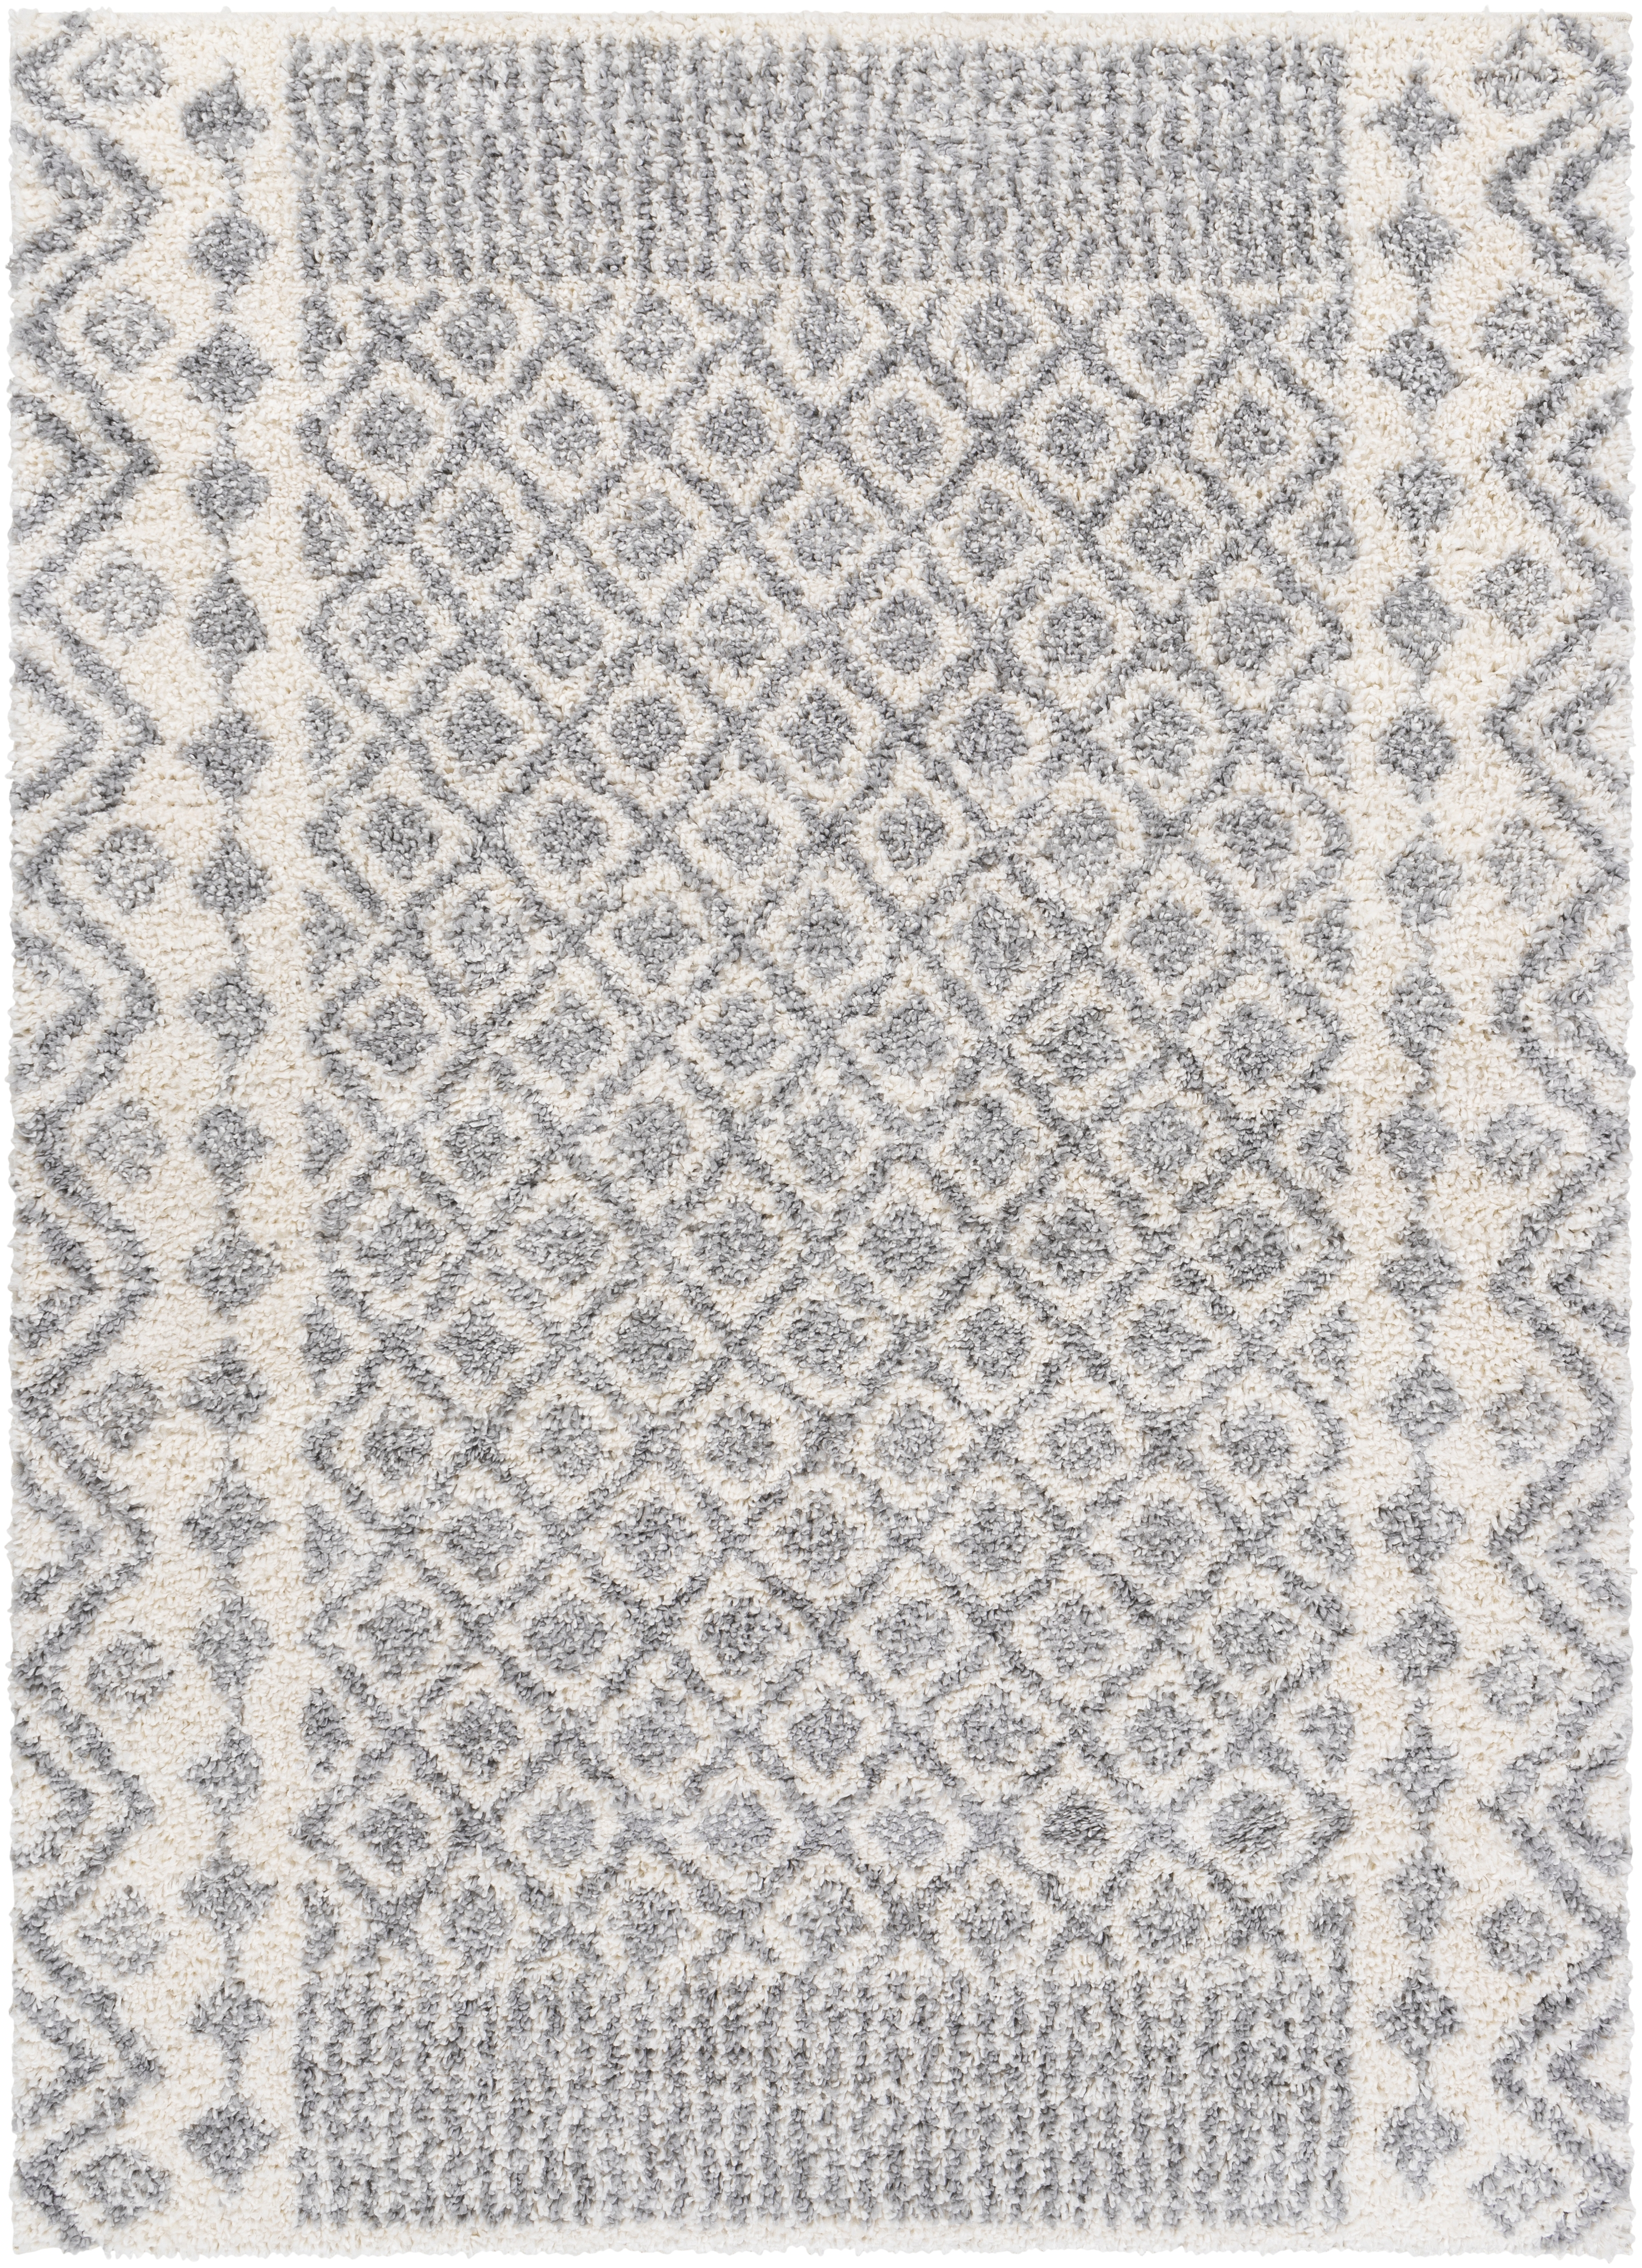 Deluxe Shag Rug, 5'3" x 7'3" - Image 0